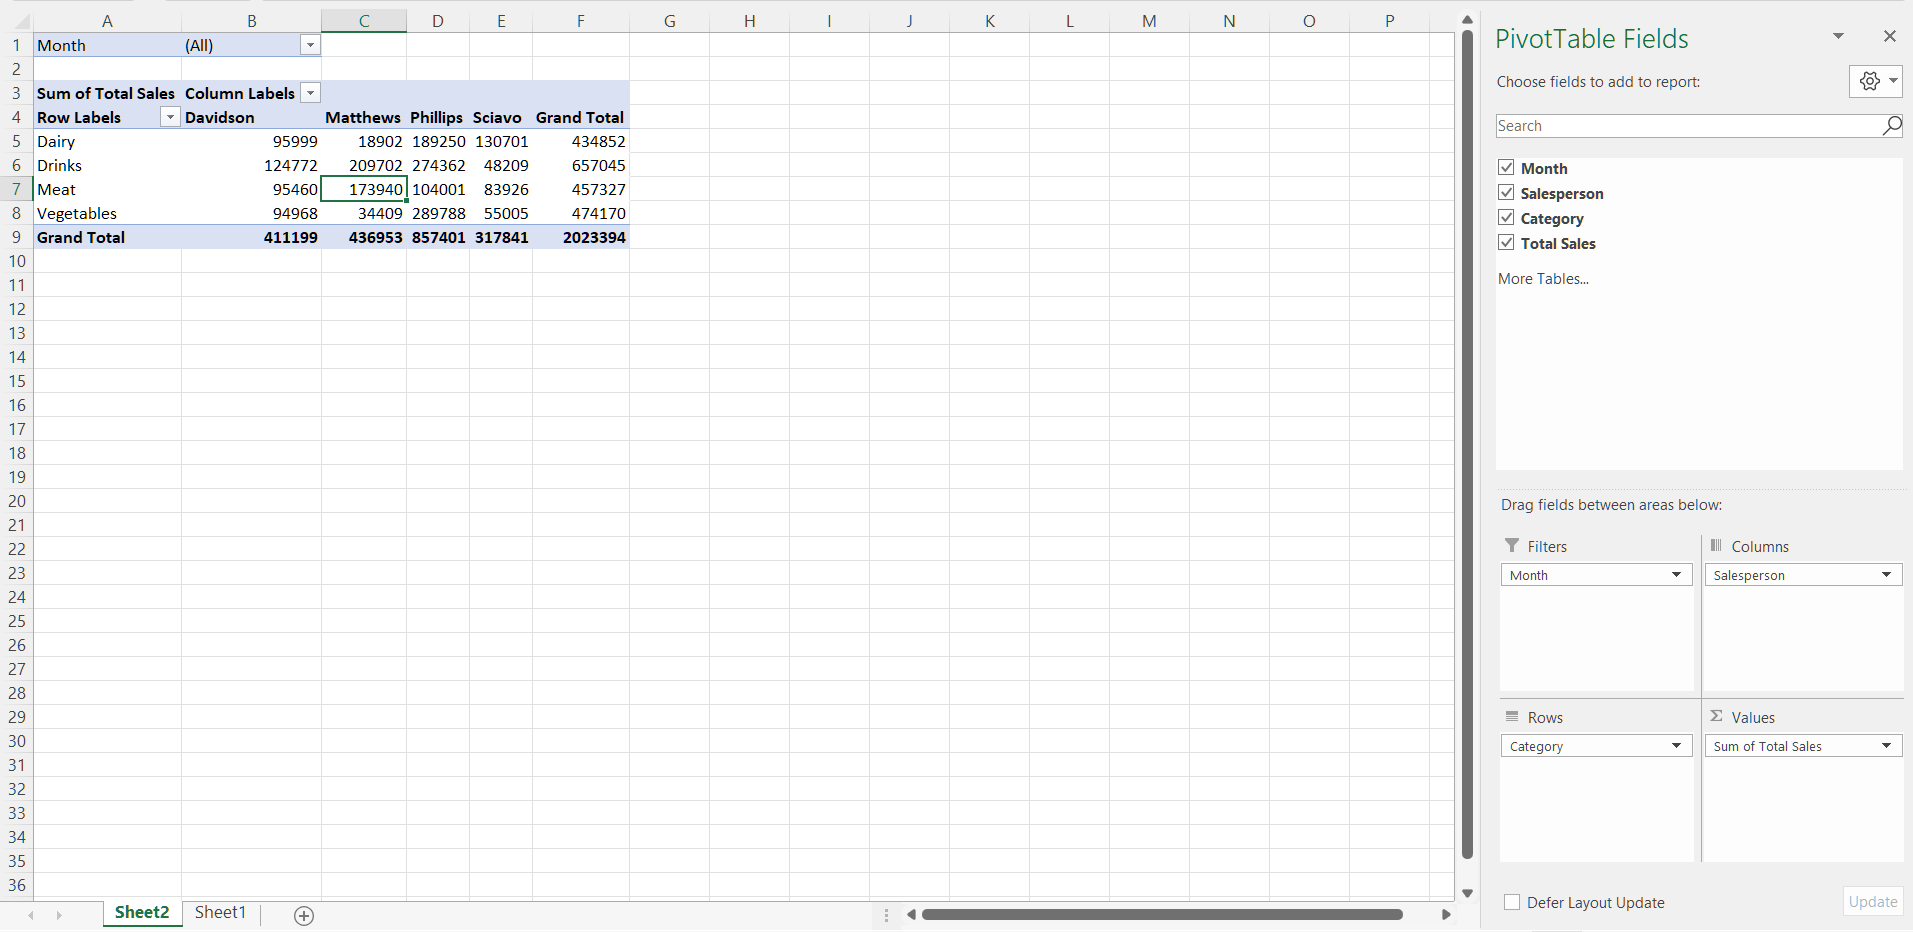 The pivot table has been refreshed